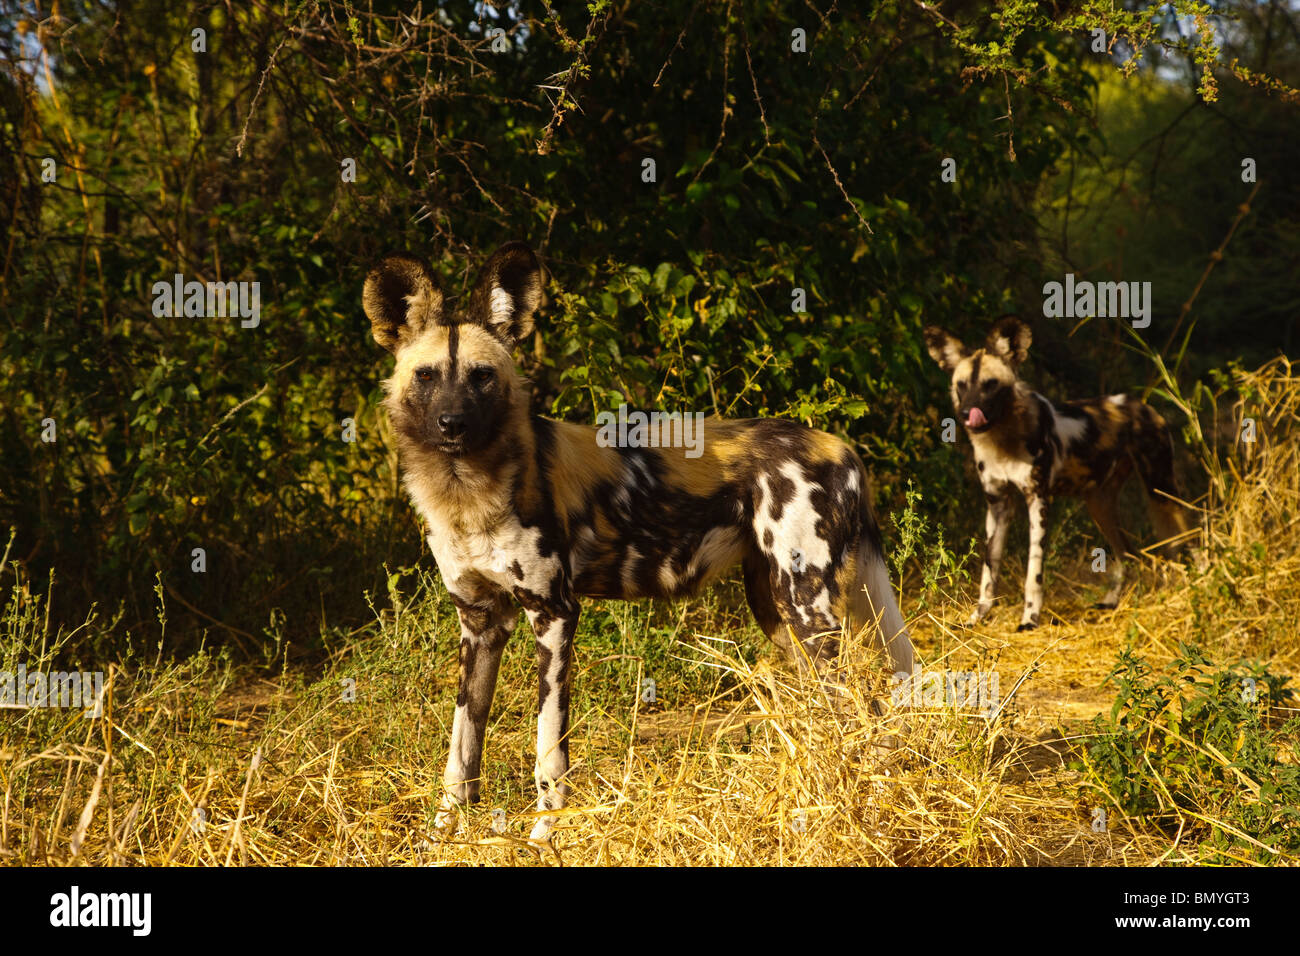 African Wild Dog (Lycaon pictus), two individuals on the edge of a thicket. Stock Photo